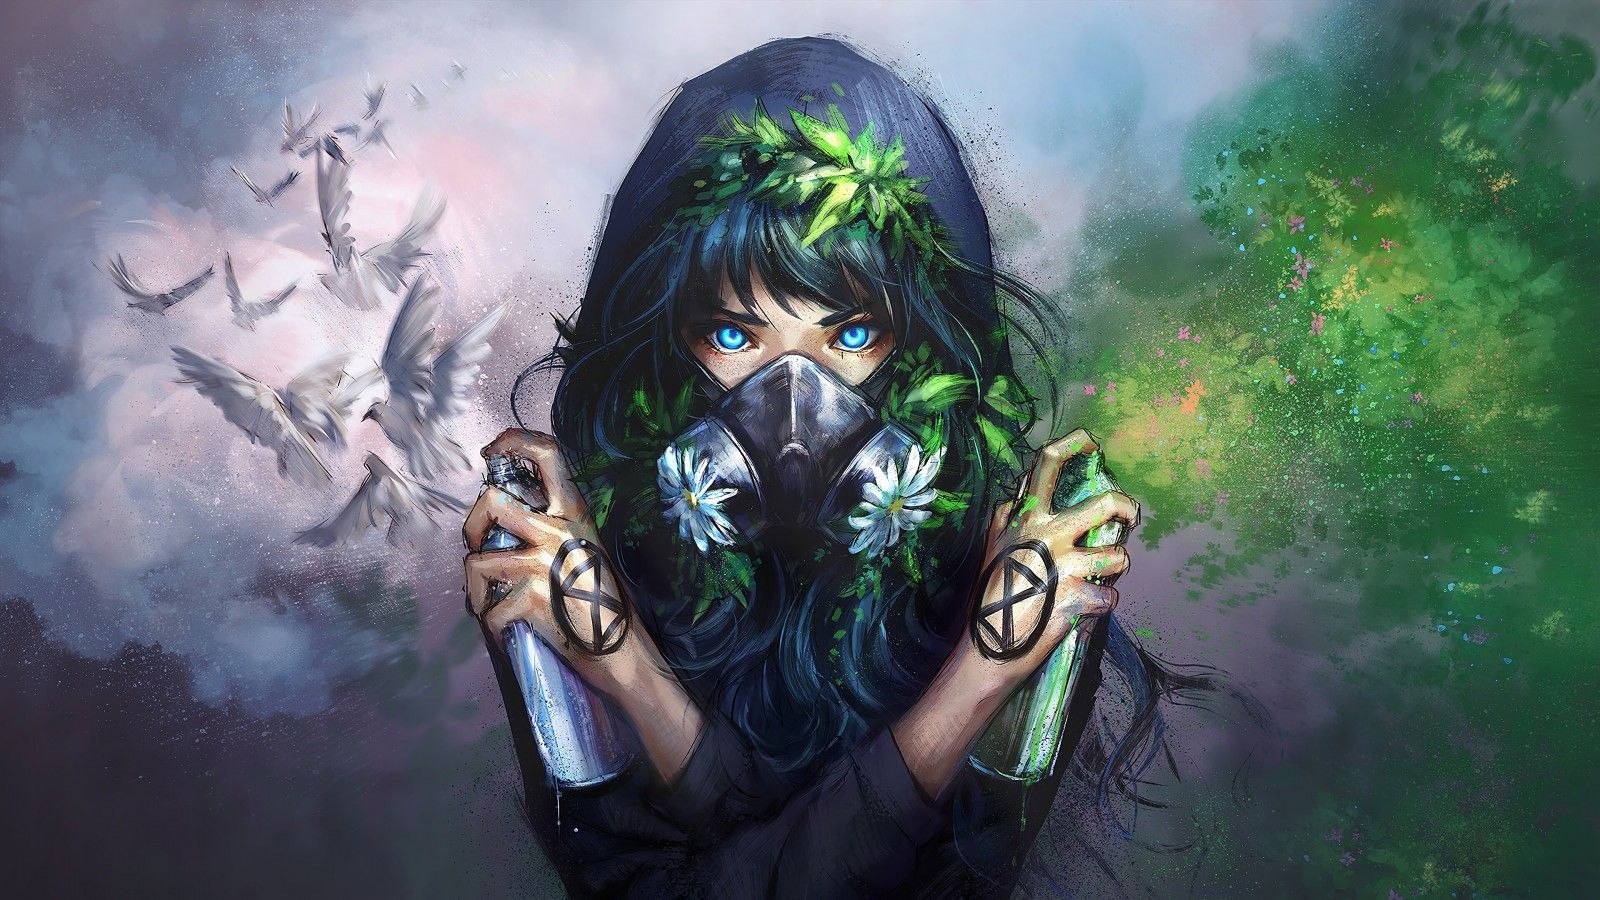 Anime Girl Gas Mask Wallpapers Wallpaper Cave 8255